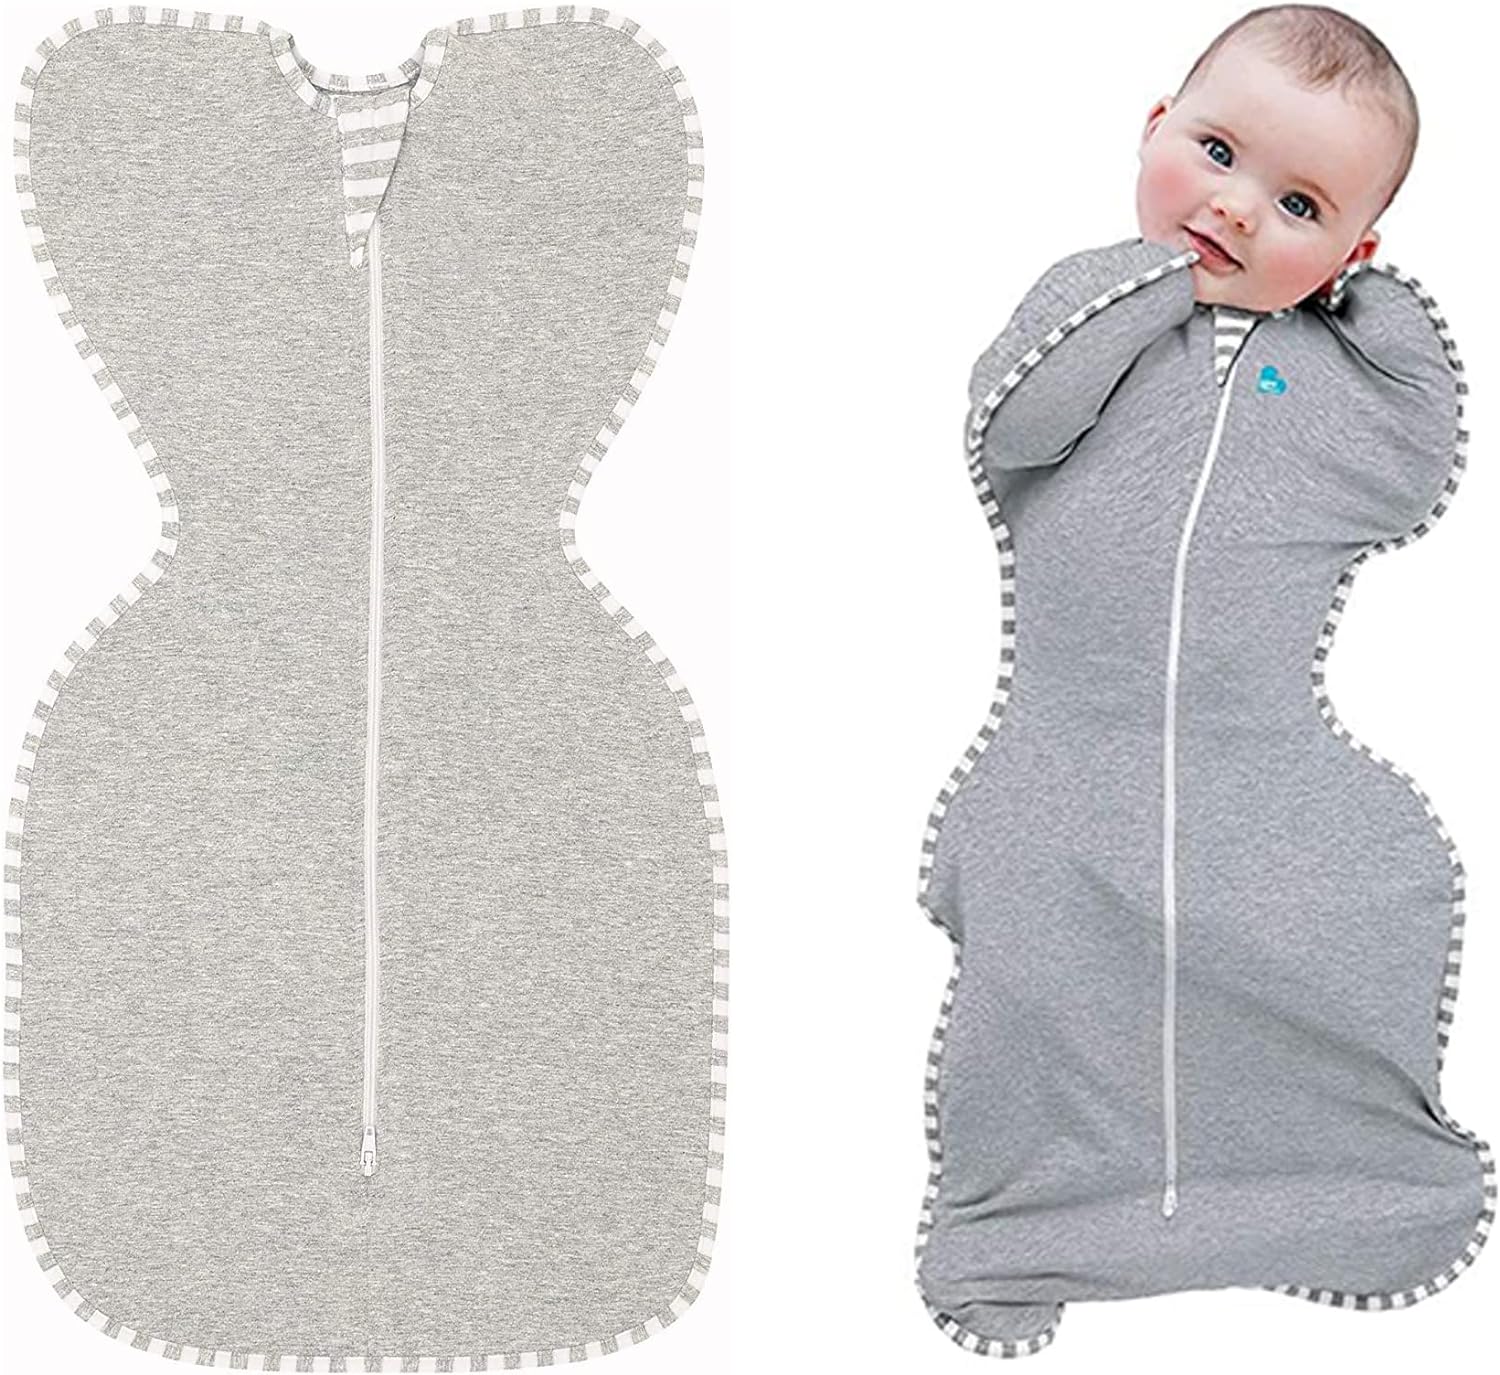 Baby Swaddle Wrap Swaddle Blanket For 0-3 Months Baby Girls And Boys Receiving Swaddling Wrap Boys Girls Ultra-Soft Newborn Sleeping Wraps for Infant Baby Gift - Grey